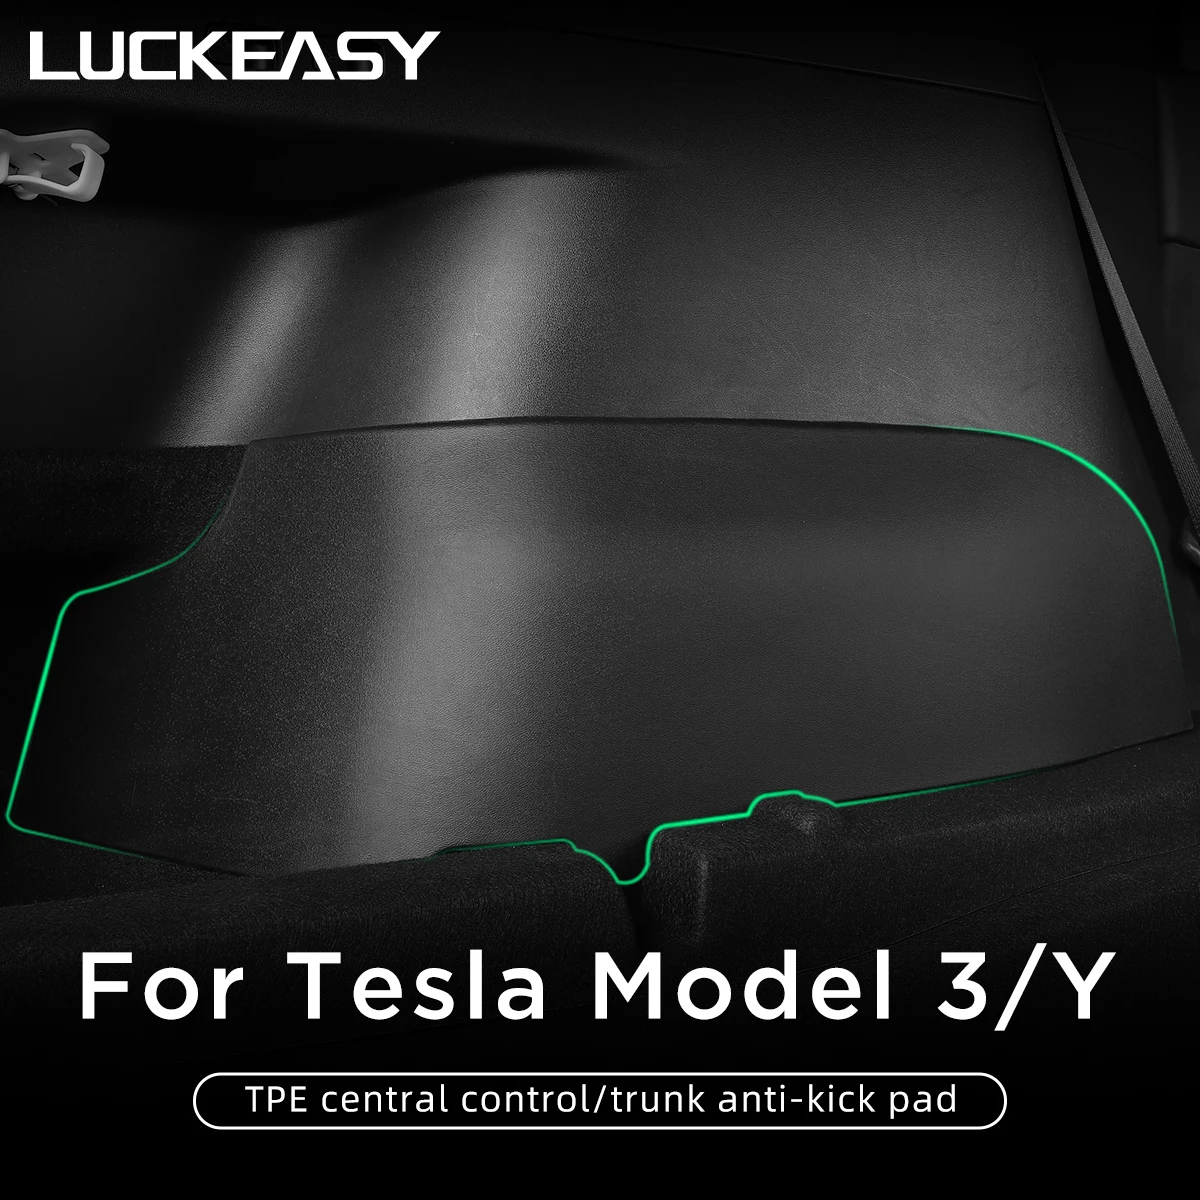 LUCKEASY For Tesla Model3 Y TPE Trunk Side Scuff Plate Pad Protection Cover Central Control Side Anti-Kick Pad Car Accessories